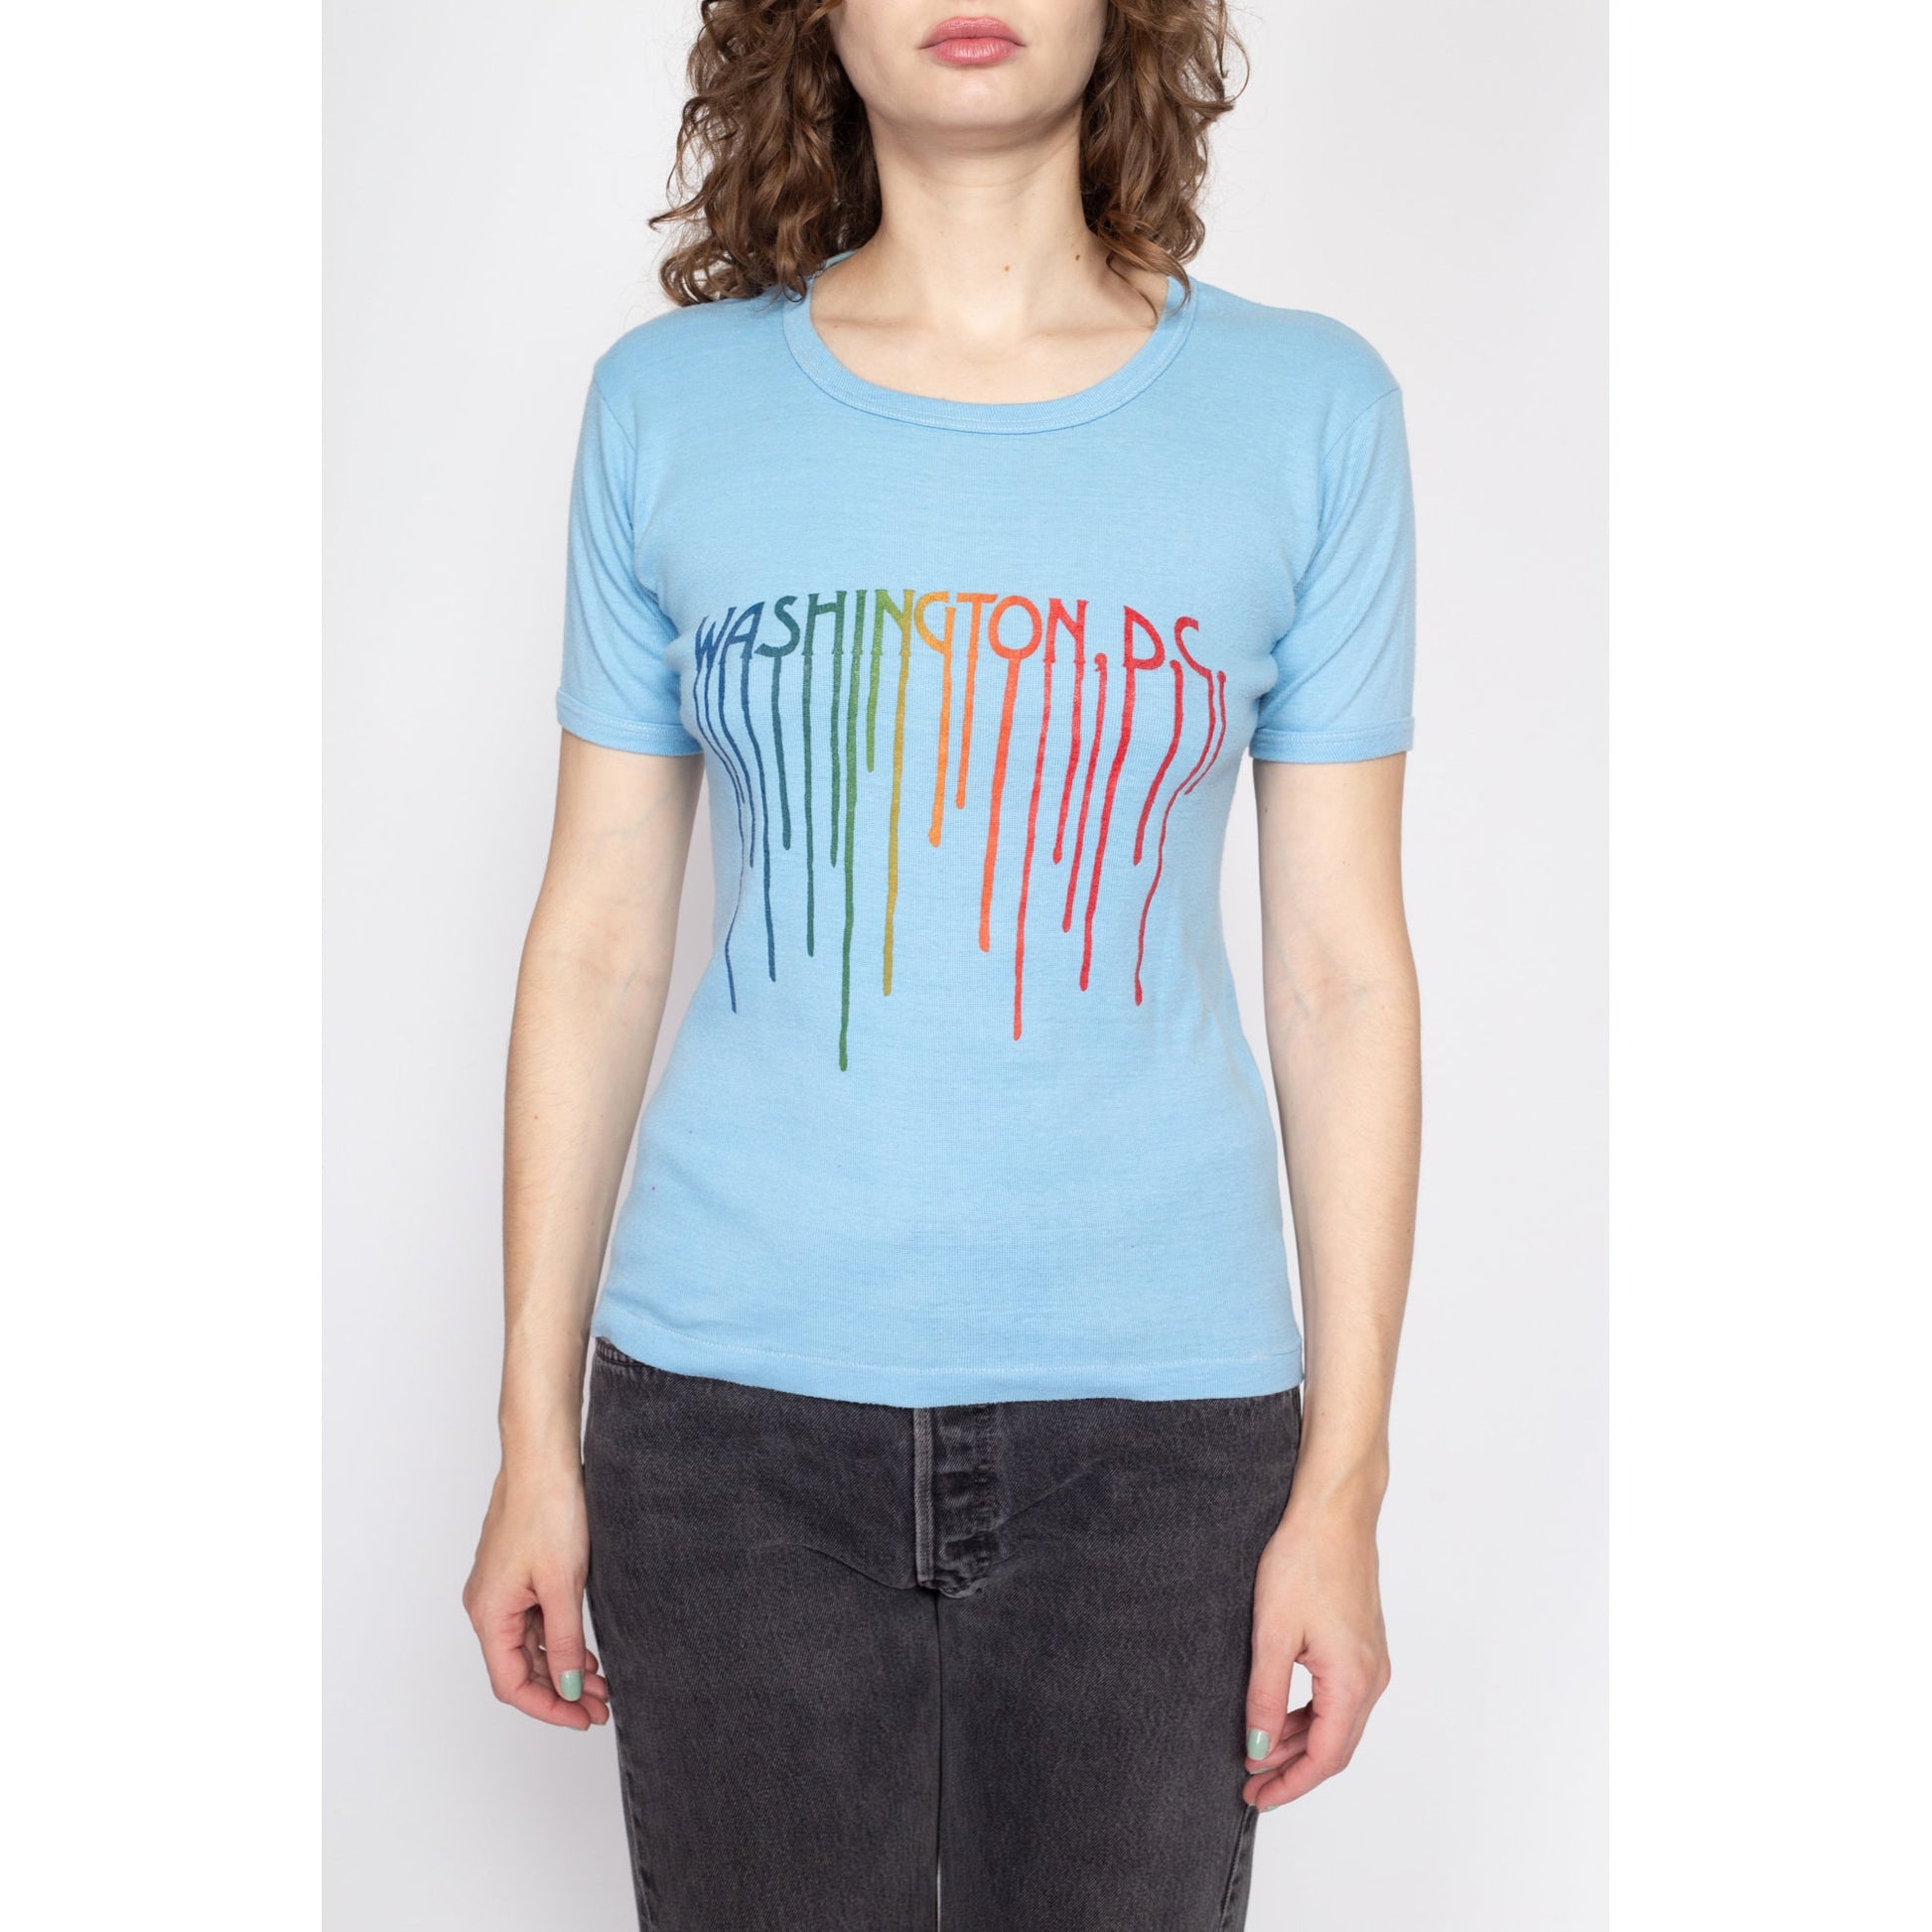 Med-Lrg 70s Washington DC Rainbow Paint Drip Graphic Tee | Vintage Blue Novelty Print Fitted T Shirt